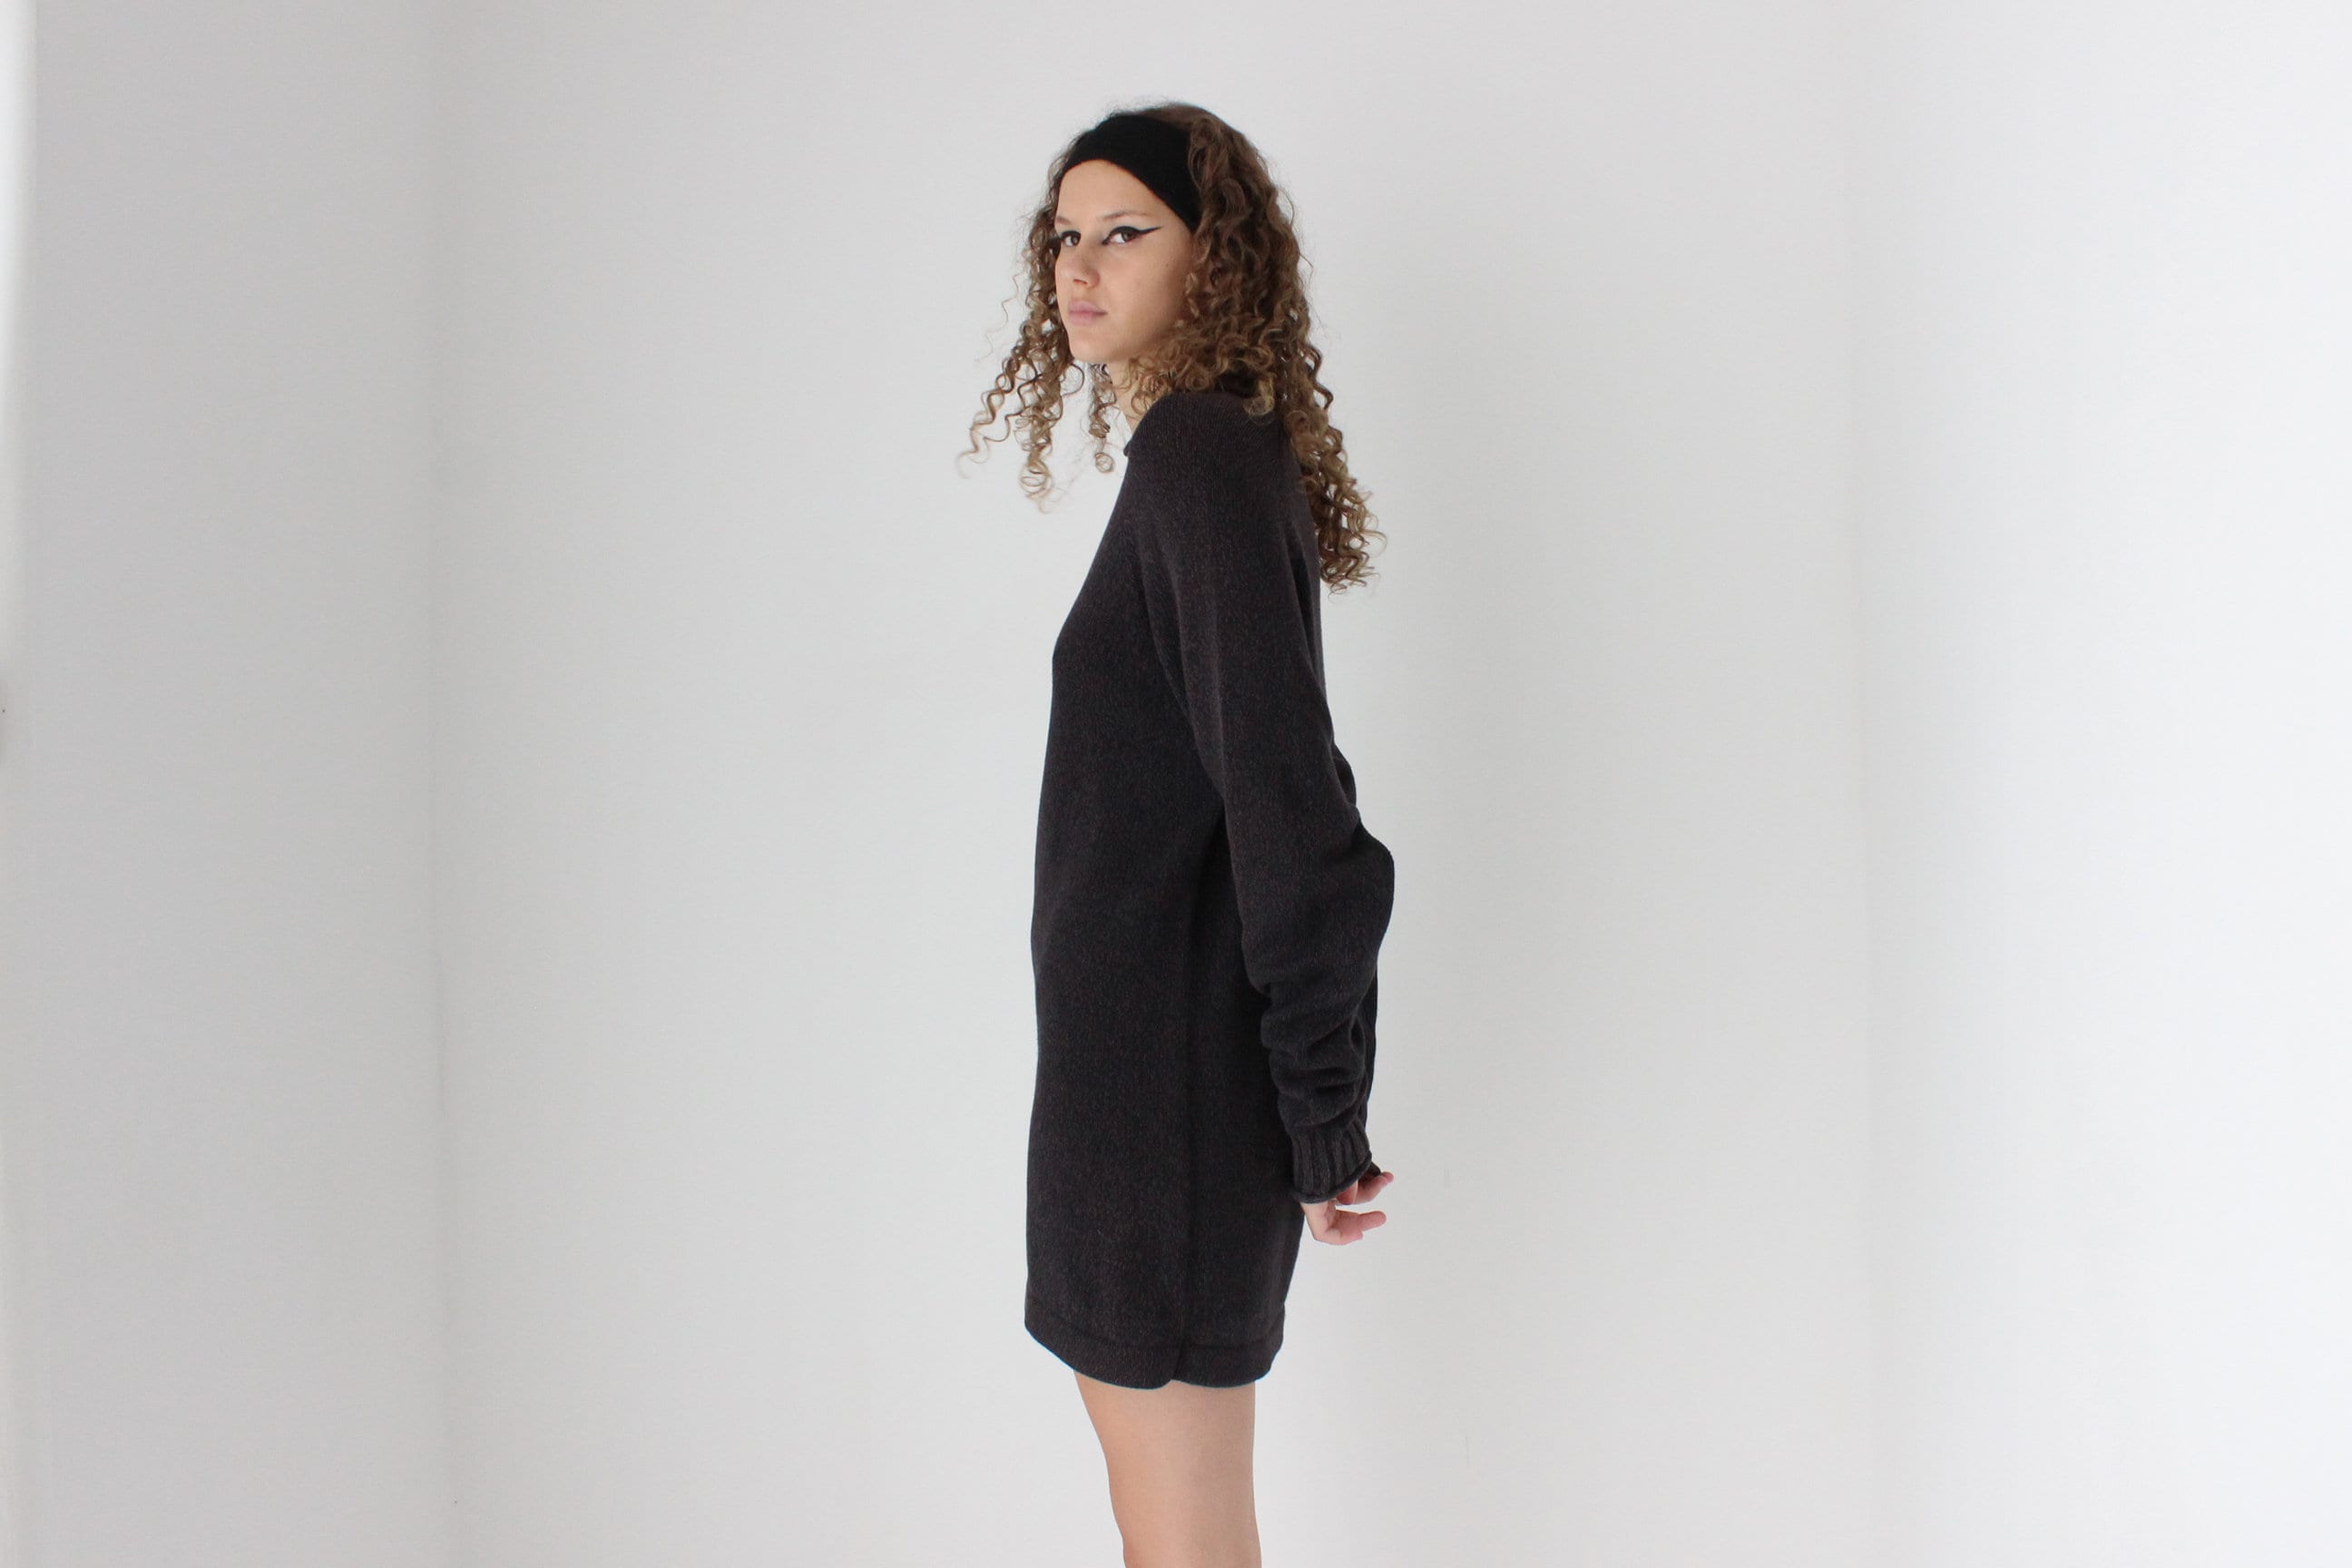 Essential 90s Charcoal Cotton Sweater Dress